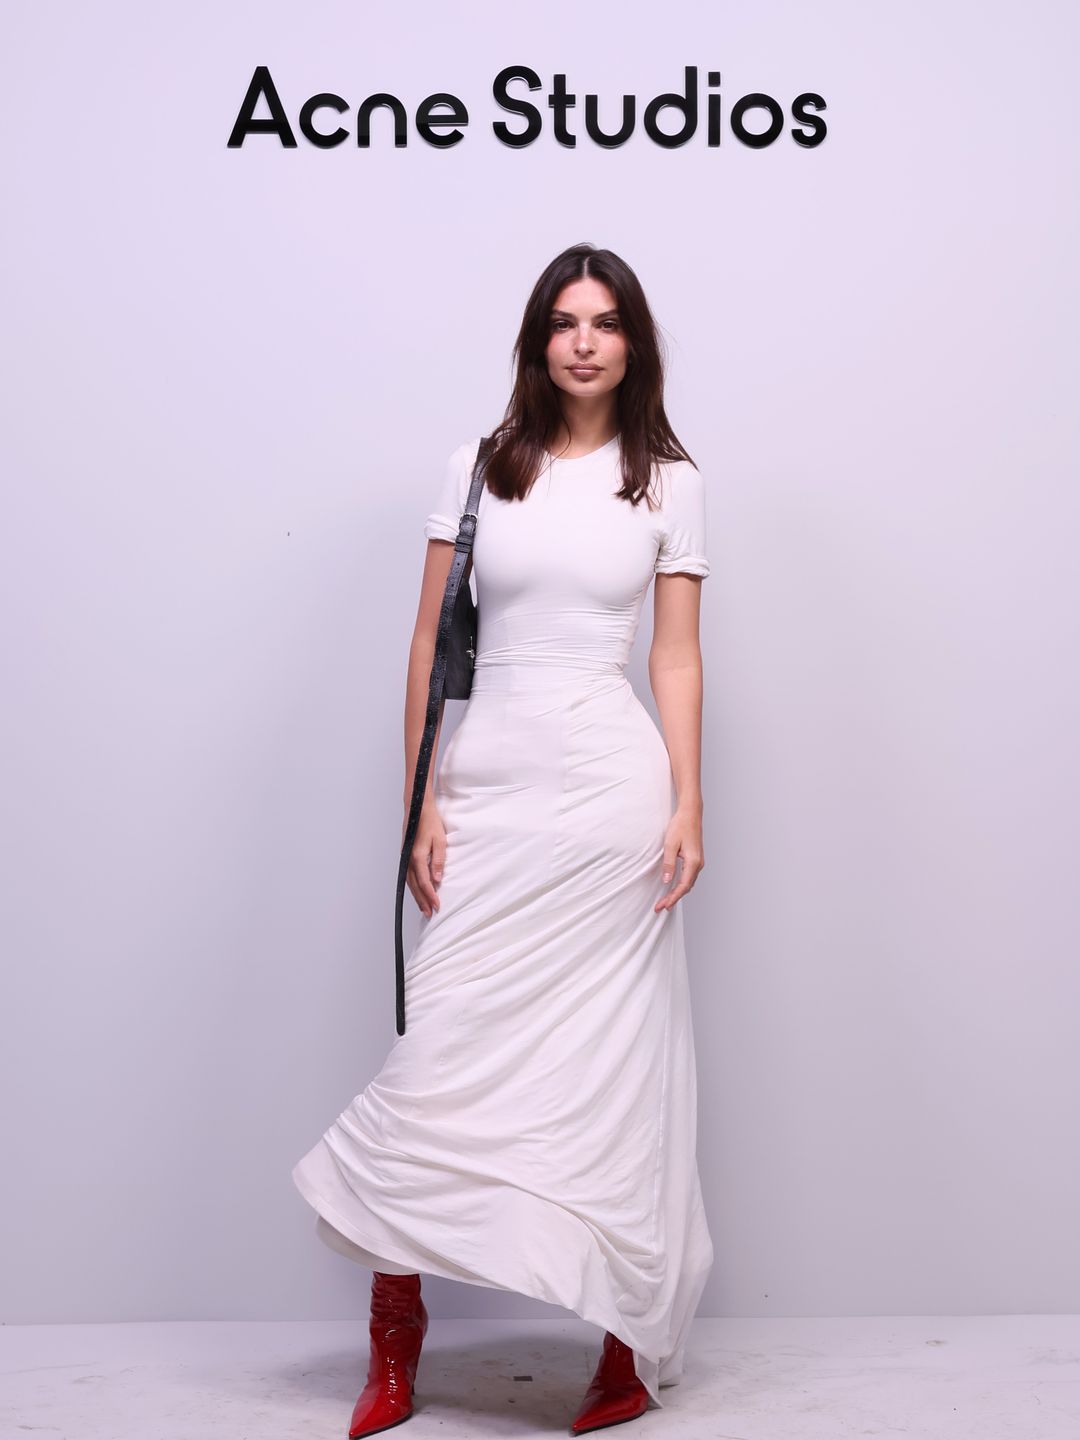 Emily Ratajkowski wore a simple yet widely elegant white structured dress and patent red boots to the Acne Studios show.